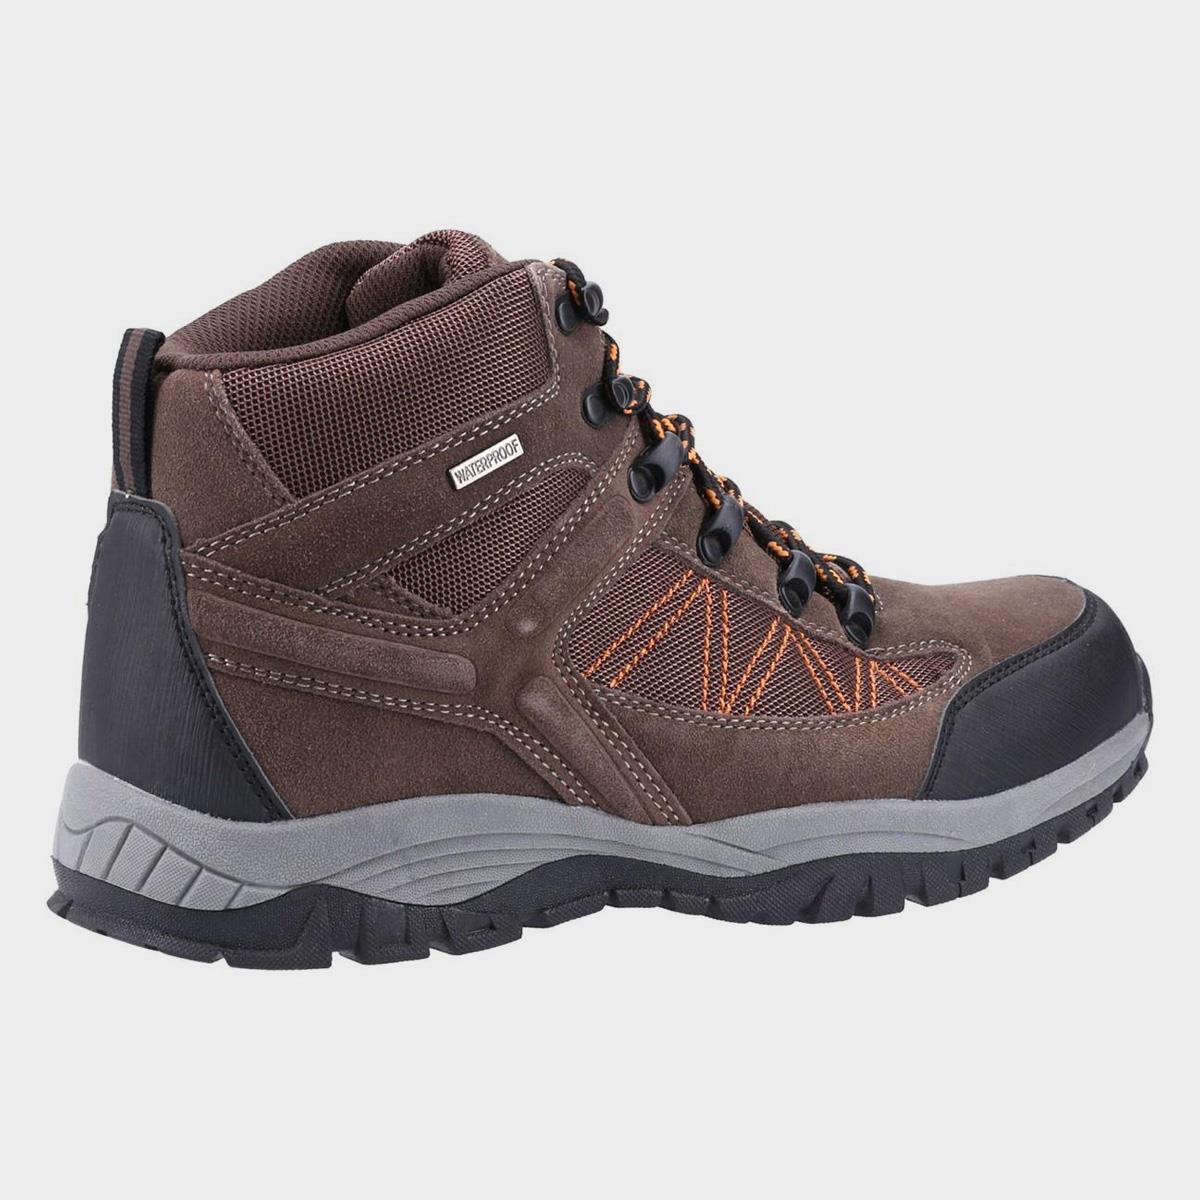 Cotswold Maisemore Mens Brown Hiking Boots-589051 | Shoe Zone